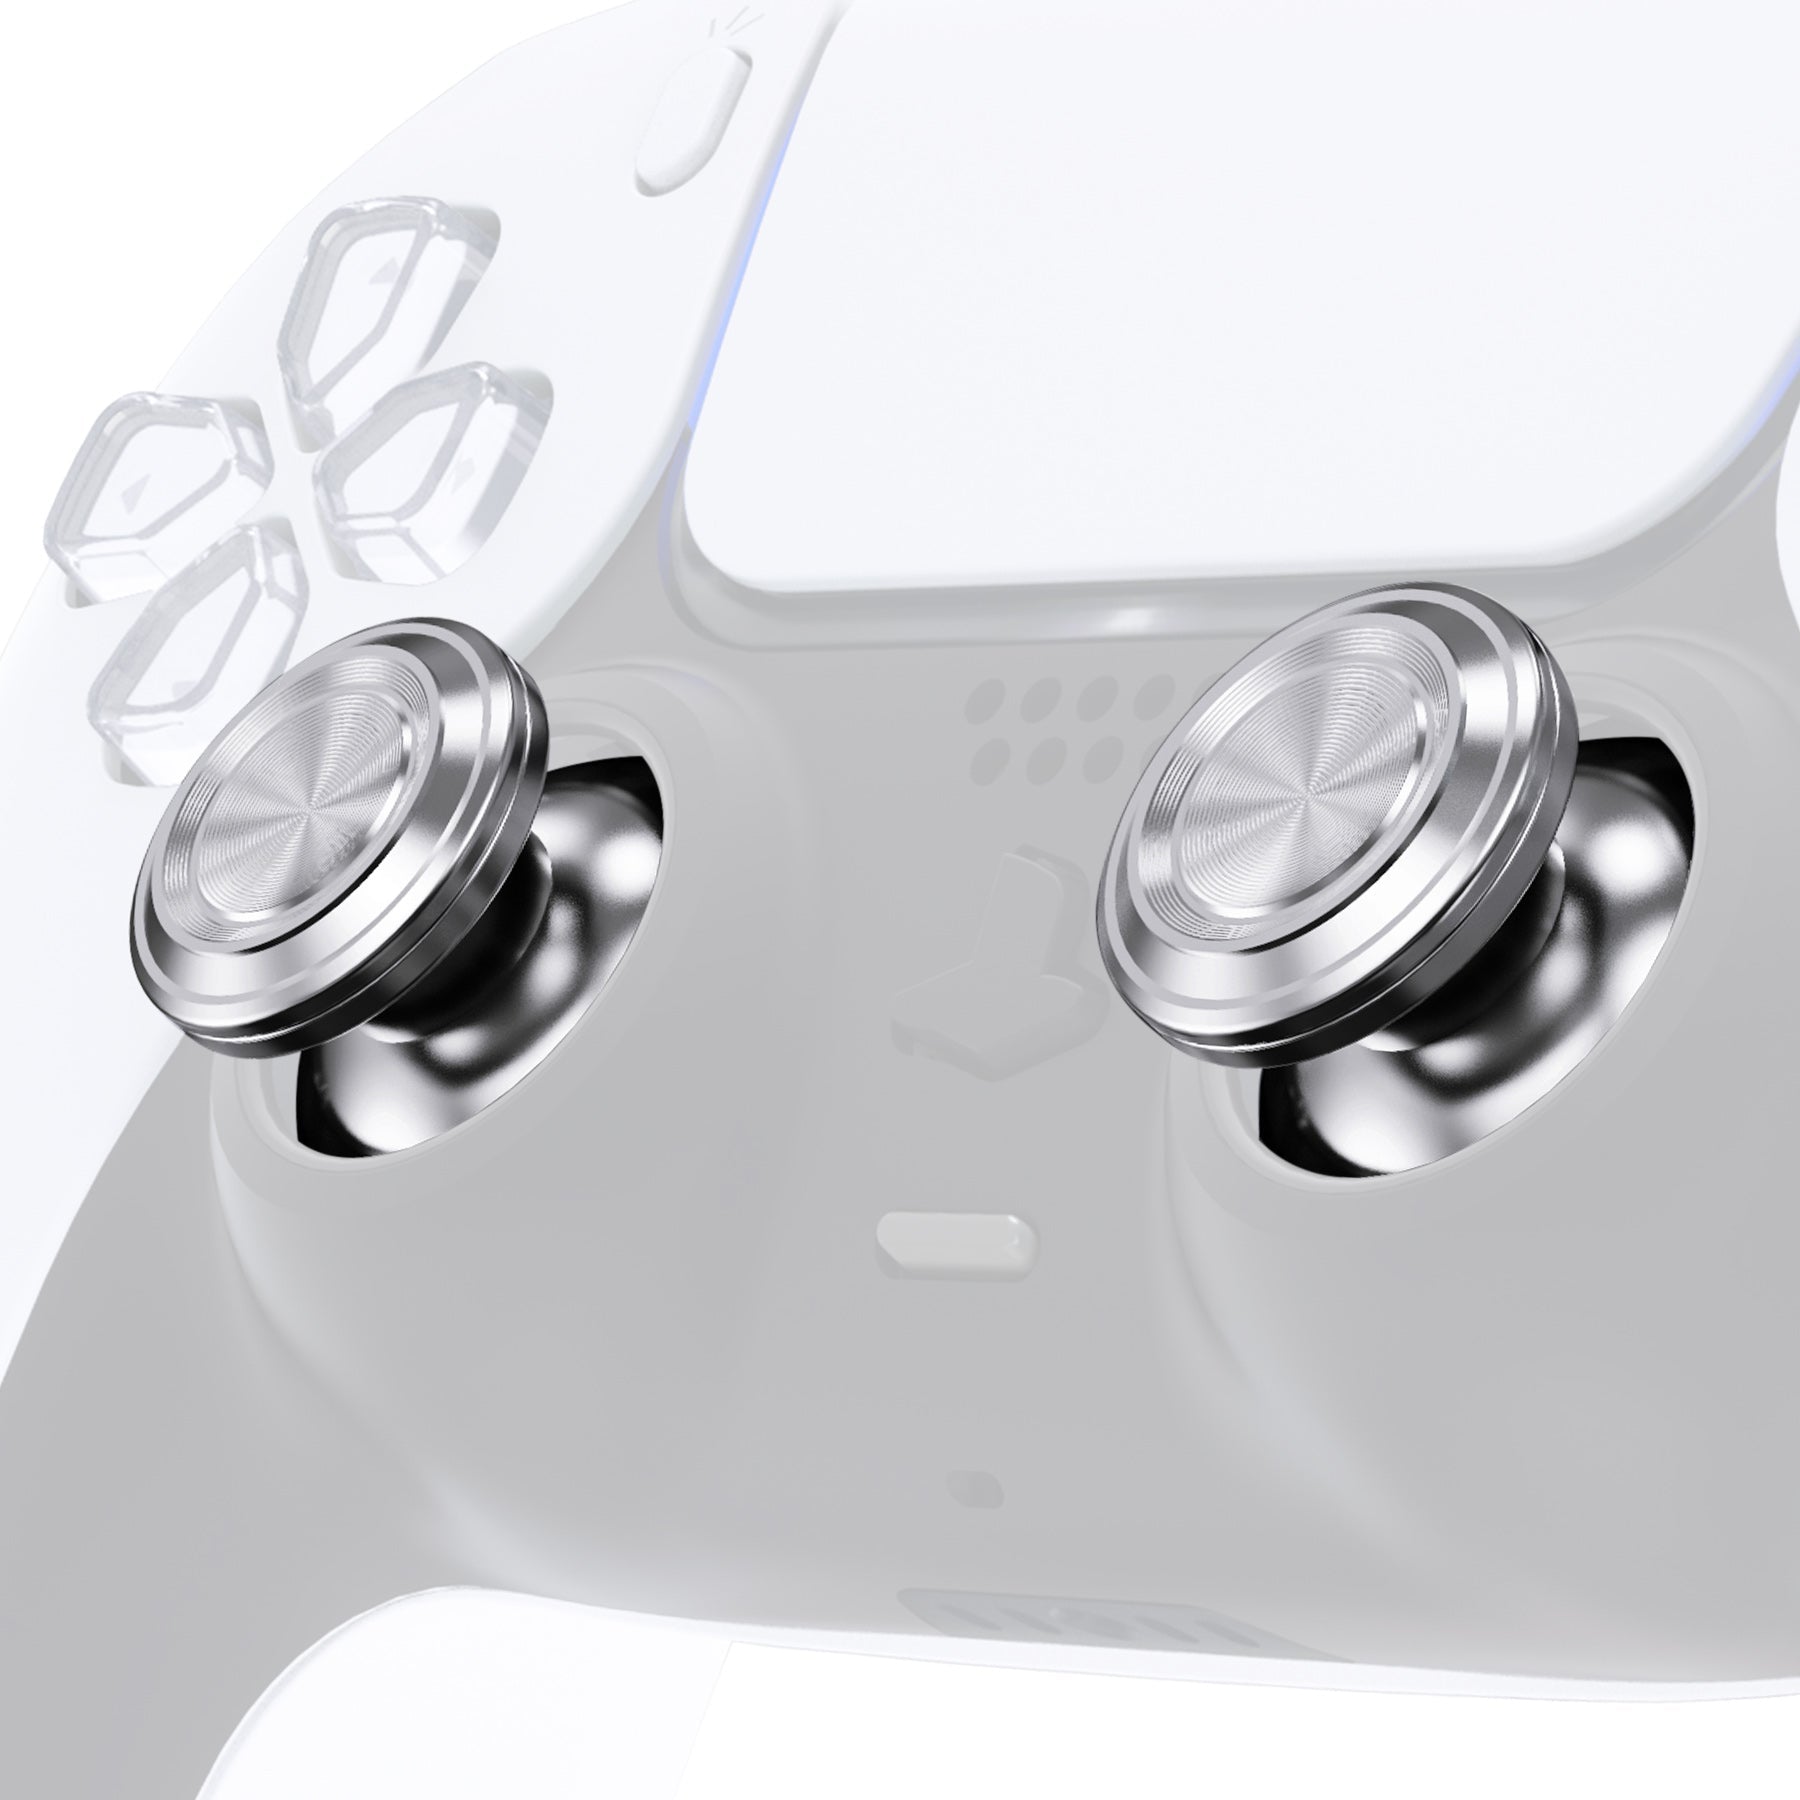 eXtremeRate Retail Custom Silver Metal Thumbsticks for ps5 Controller, Replacement Aluminum Analog Stick Joystick for ps4 Controller - Controller NOT Included - JPFC002